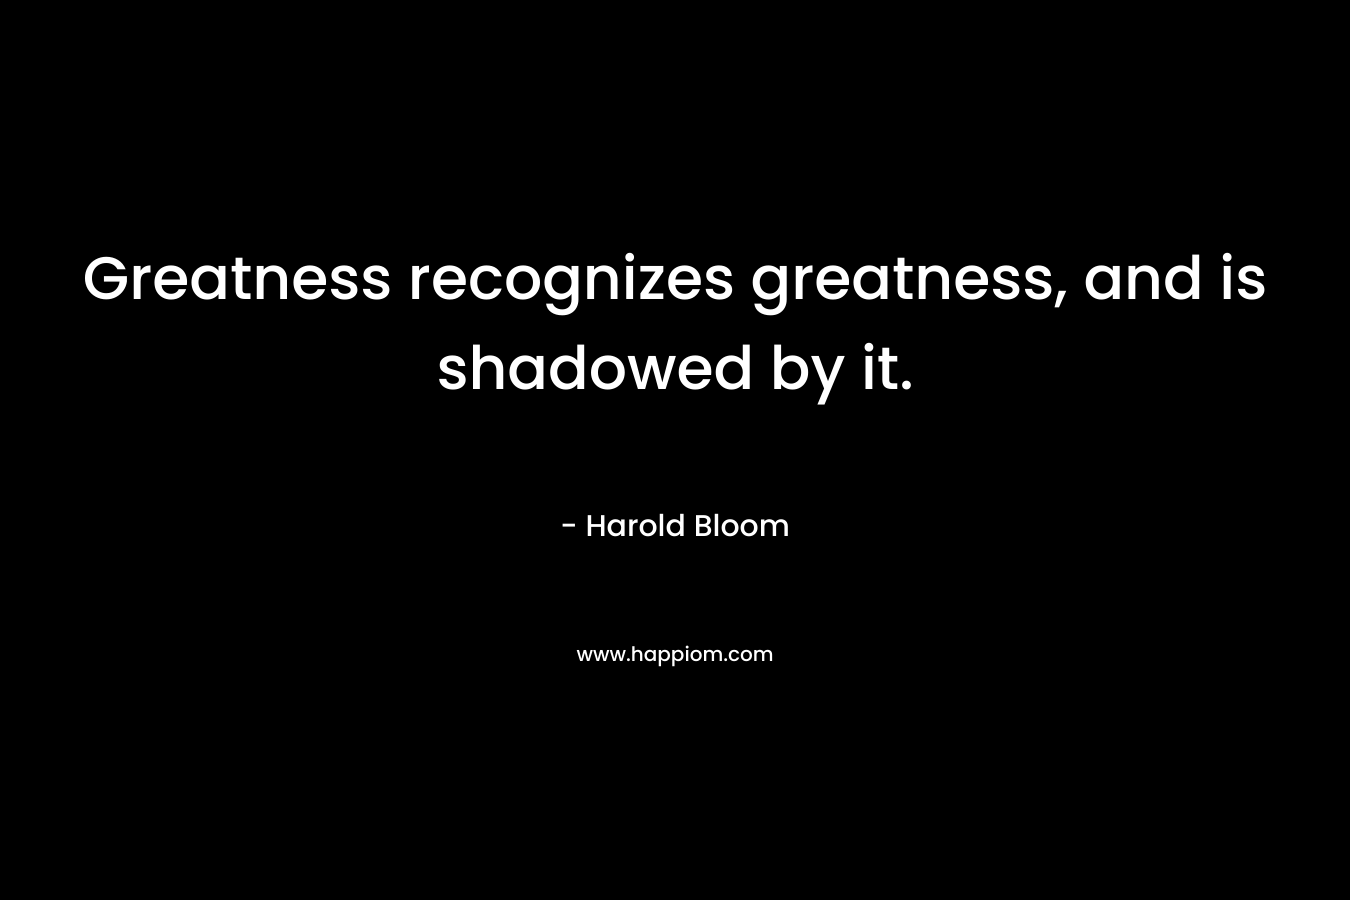 Greatness recognizes greatness, and is shadowed by it. – Harold Bloom